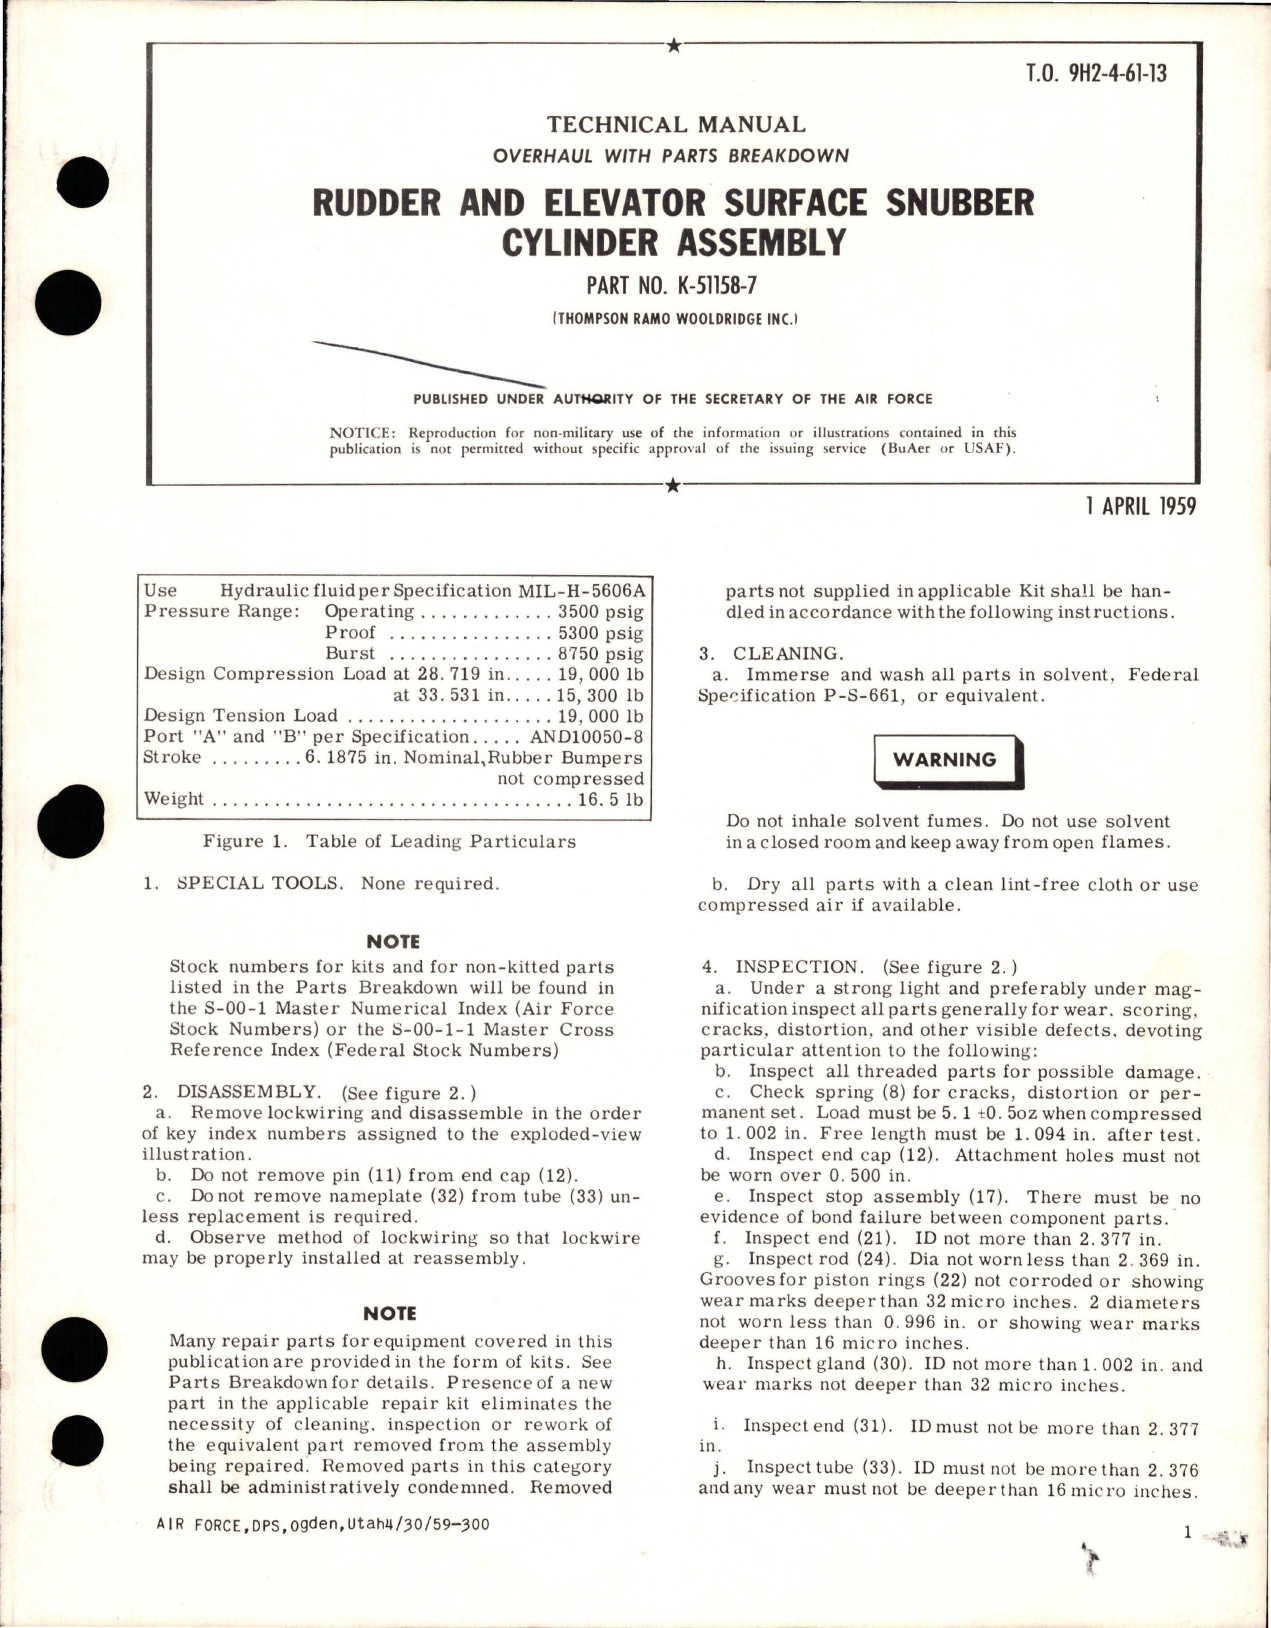 Sample page 1 from AirCorps Library document: Overhaul with Parts Breakdown for Rudder and Elevator Surface Snubber Cylinder Assembly - Part K-51158-7 